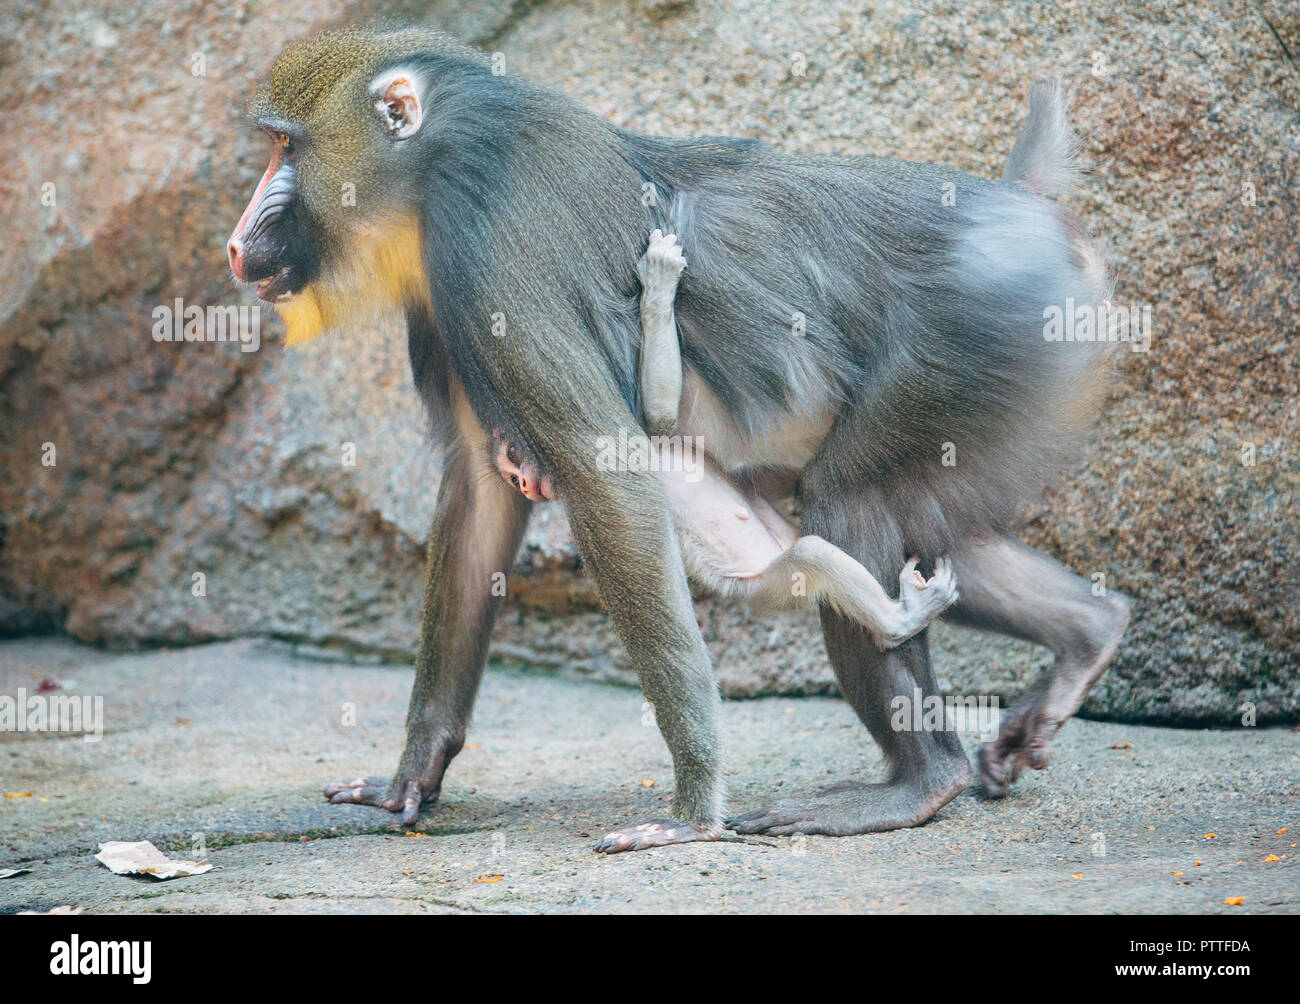 Dresden, Saxony. 11th Oct, 2018. The Mandrill monkey girl Aluna plays with her mother Ikela at Dresden Zoo. Aluna was born on September 6th and is the seventh joint kitten of the monkey leader Napo and Ikela. Credit: Oliver Killig/dpa-Zentralbild/dpa/Alamy Live News Stock Photo